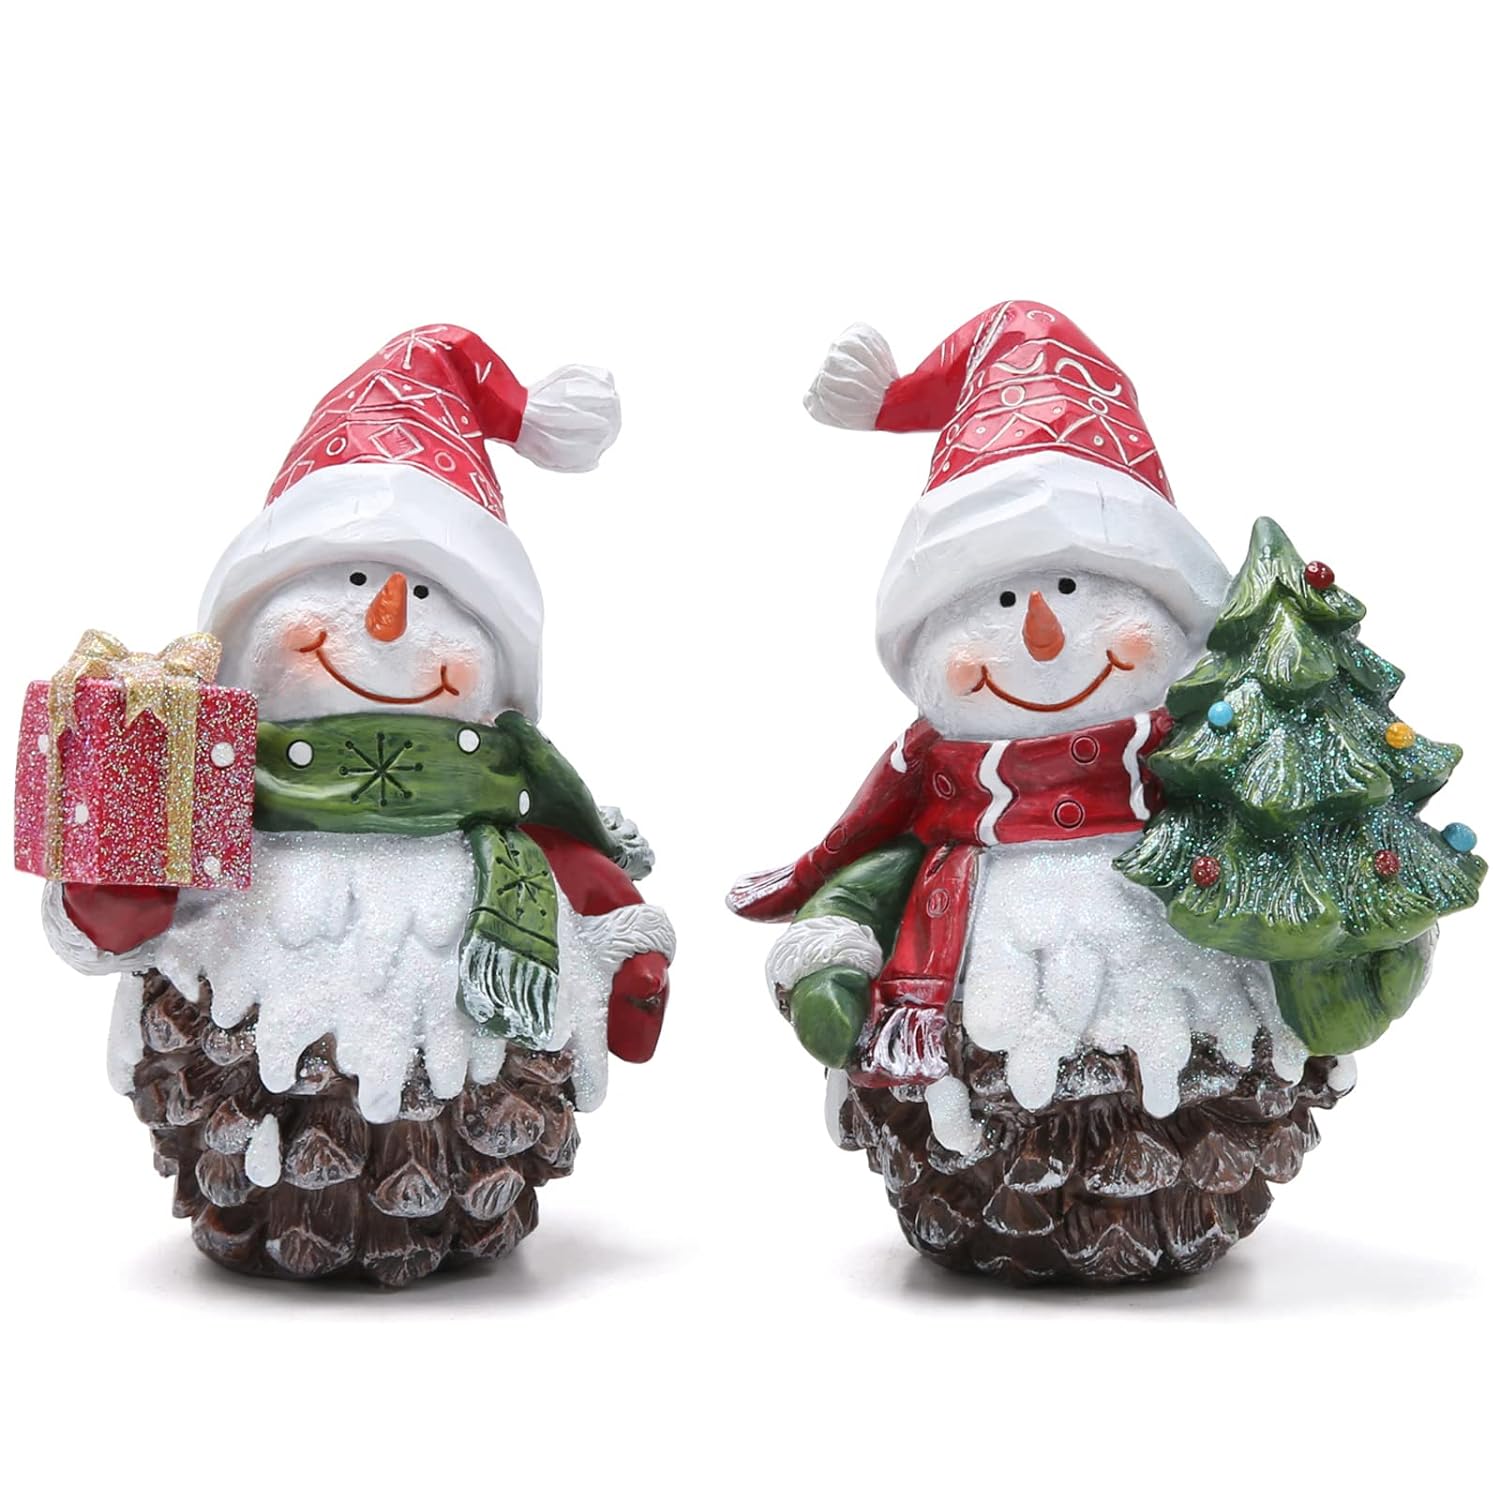 Great Choice Products 2 Pcs Christmas Pin Cones Snowman Decorations Xmas Snowman Figurines Winter Decor Handmade Snowman Figurines For Xmas De?